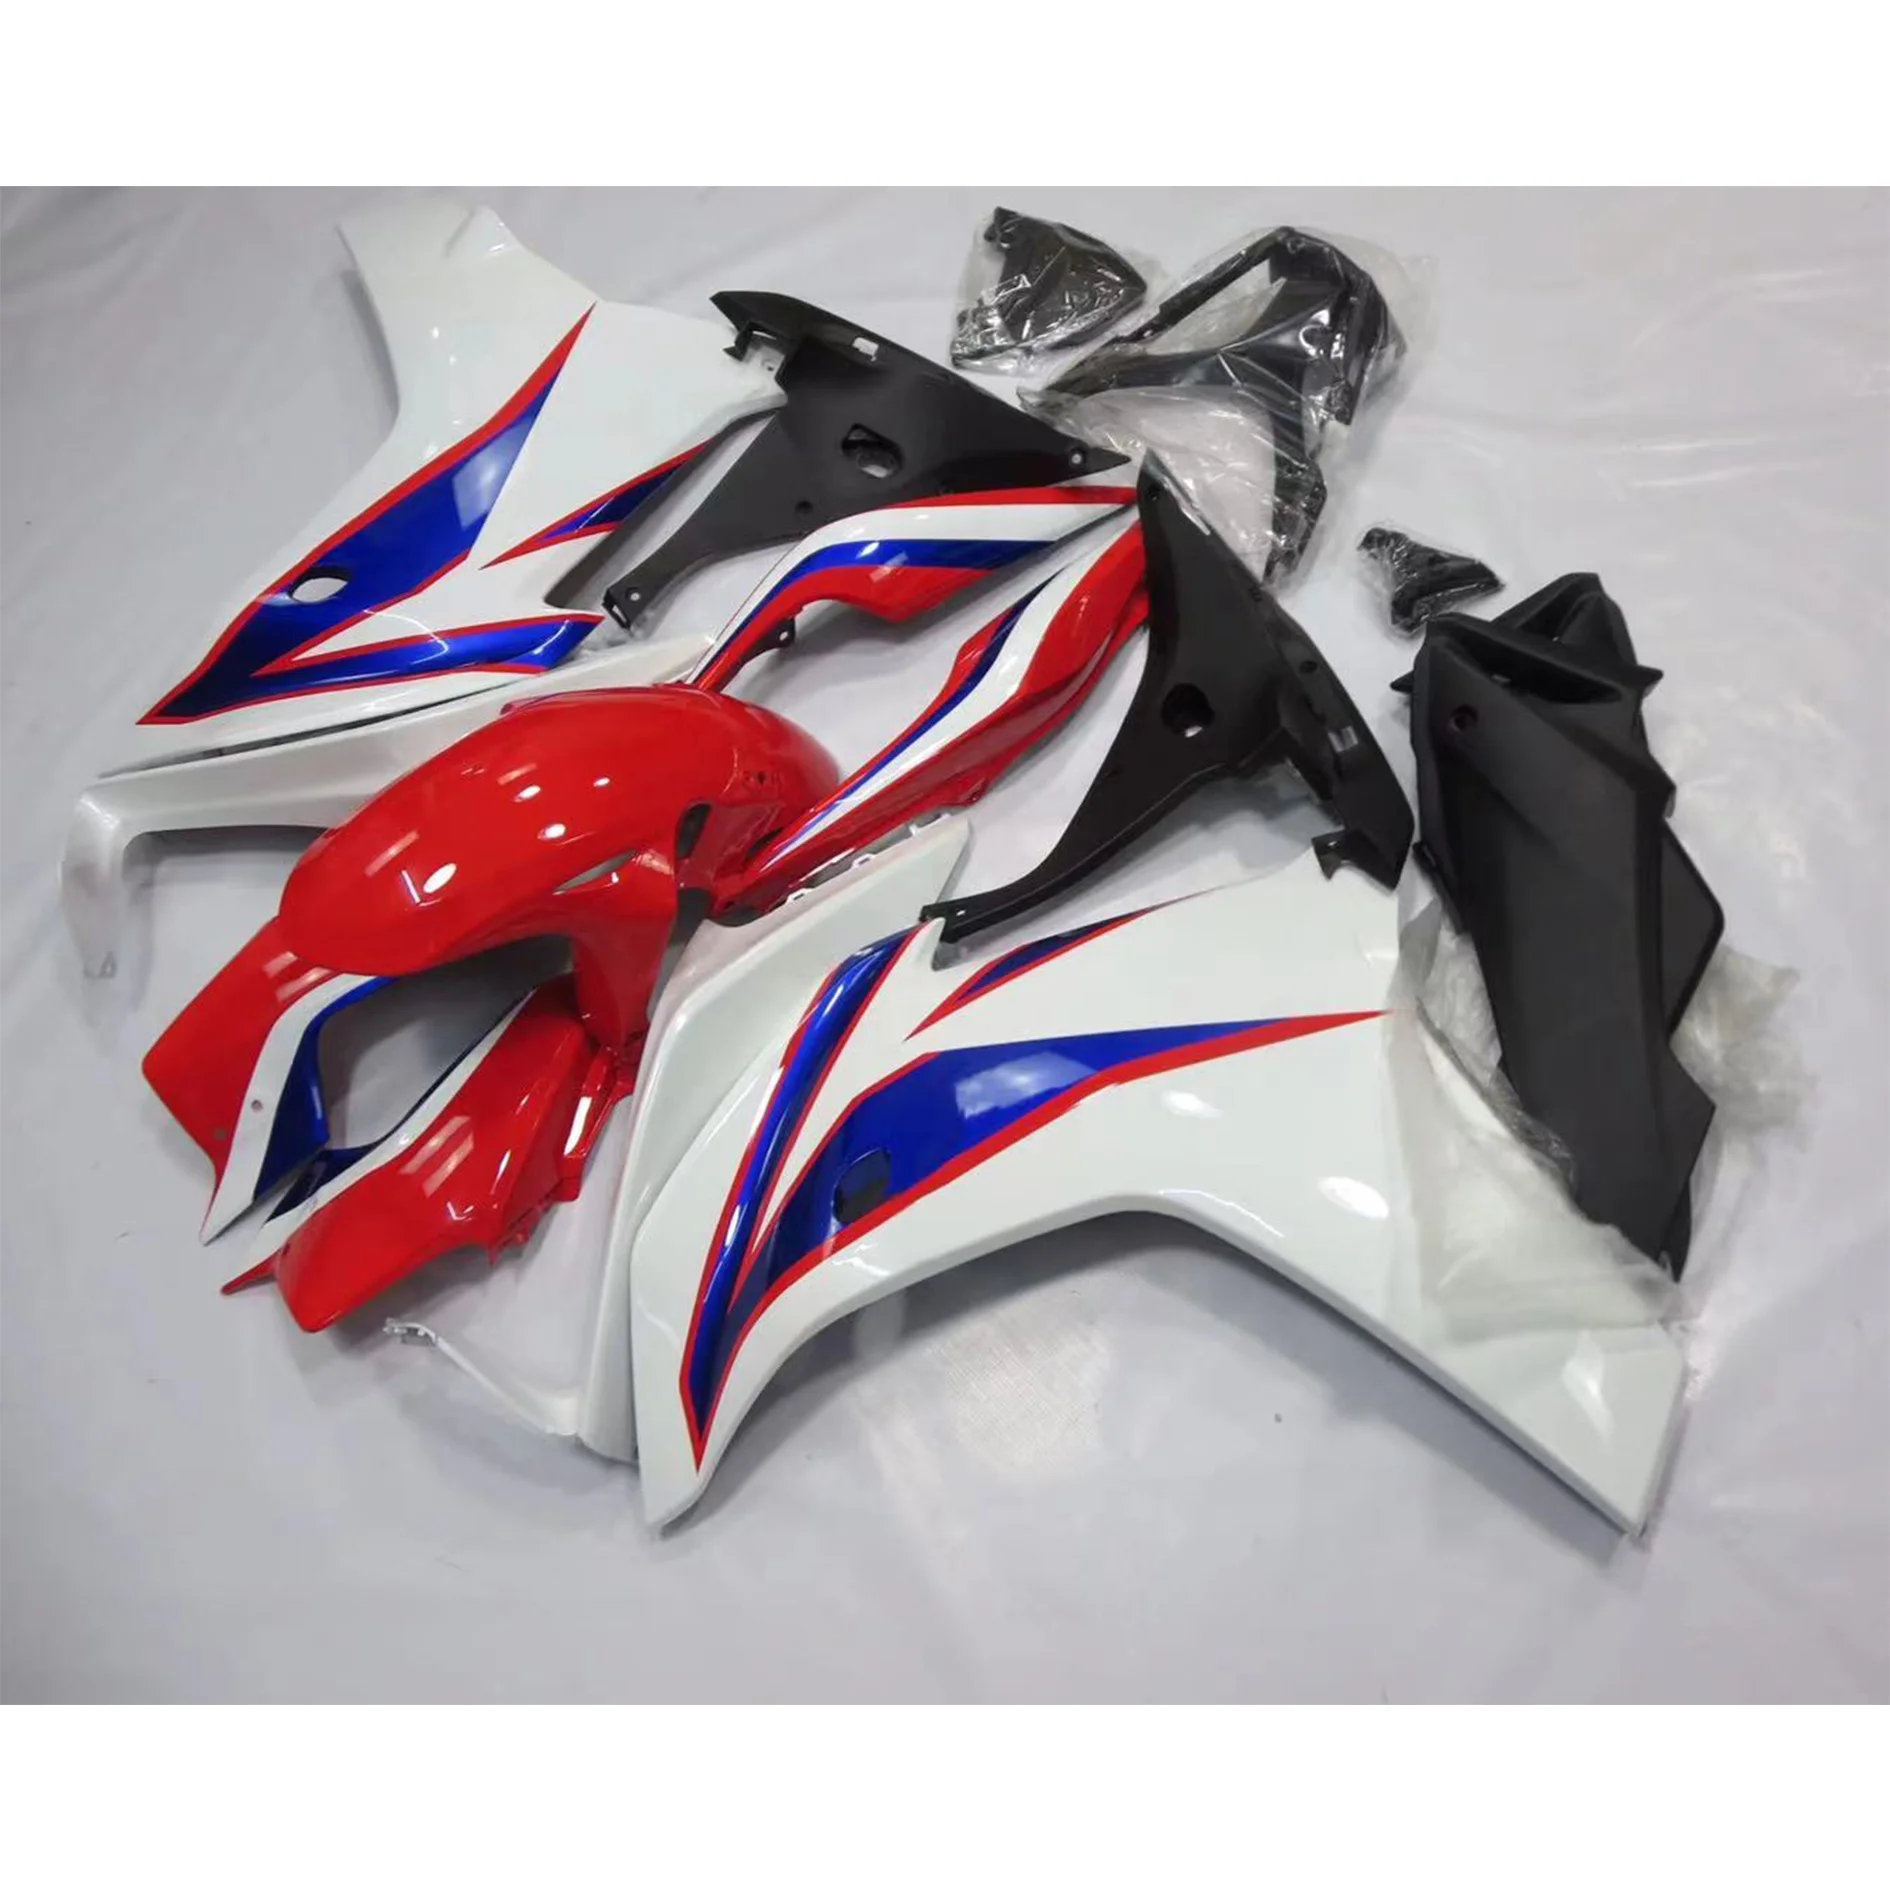 

2022 WHSC Red Blue White OEM Motorcycle Accessories For HONDA CBR600F 2011-2012 11 12 Motorcycle Body Systems Fairing Kits, Pictures shown